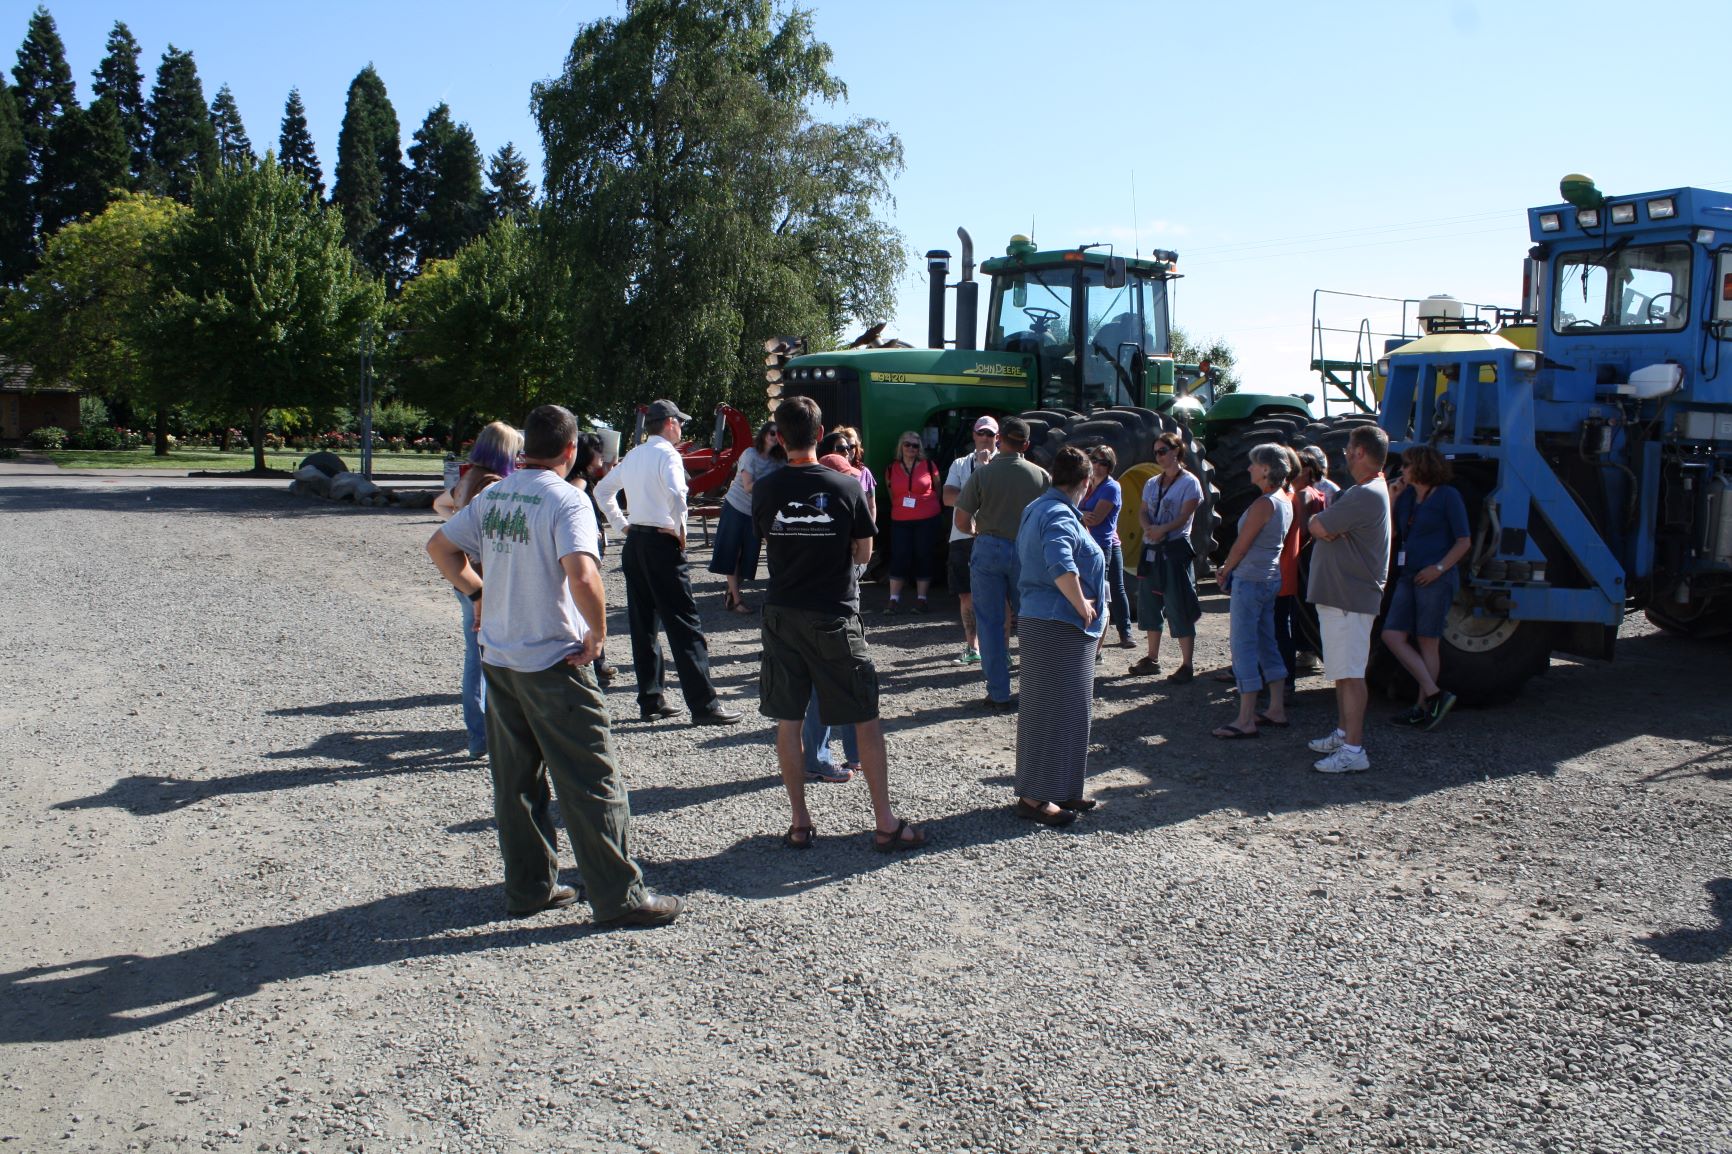 A gathering of SAI participants in front of a green and blue farm equipment